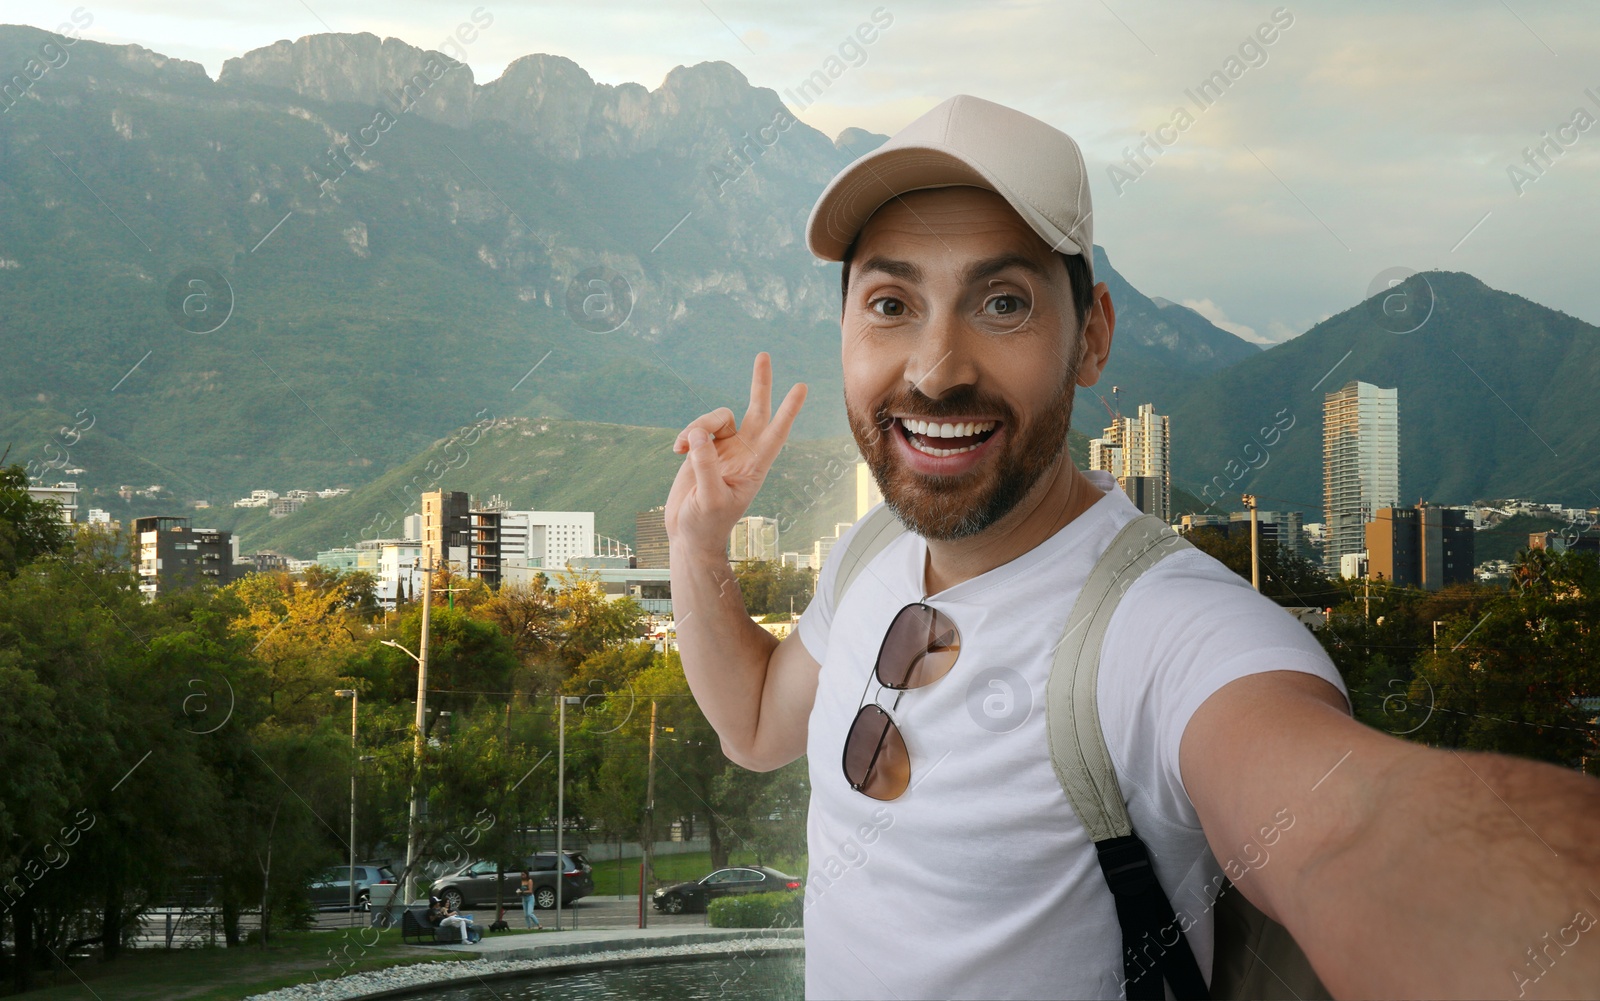 Image of Smiling man taking selfie and showing peace sign against cityscape